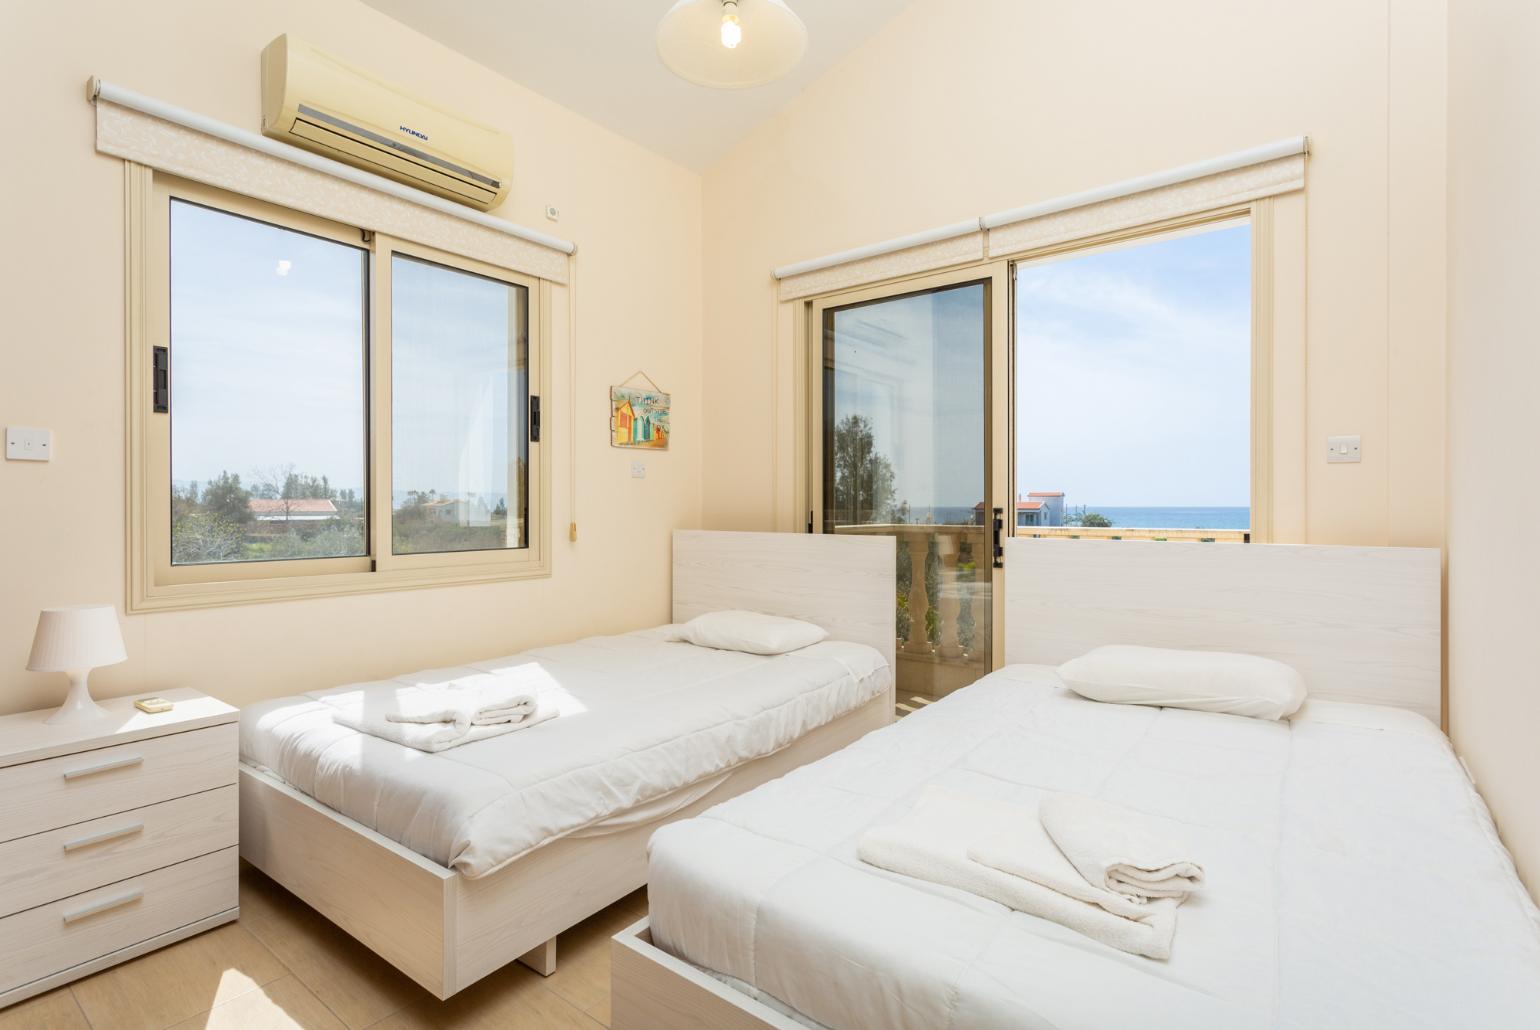 Twin bedroom with A/C, sea views, and balcony access